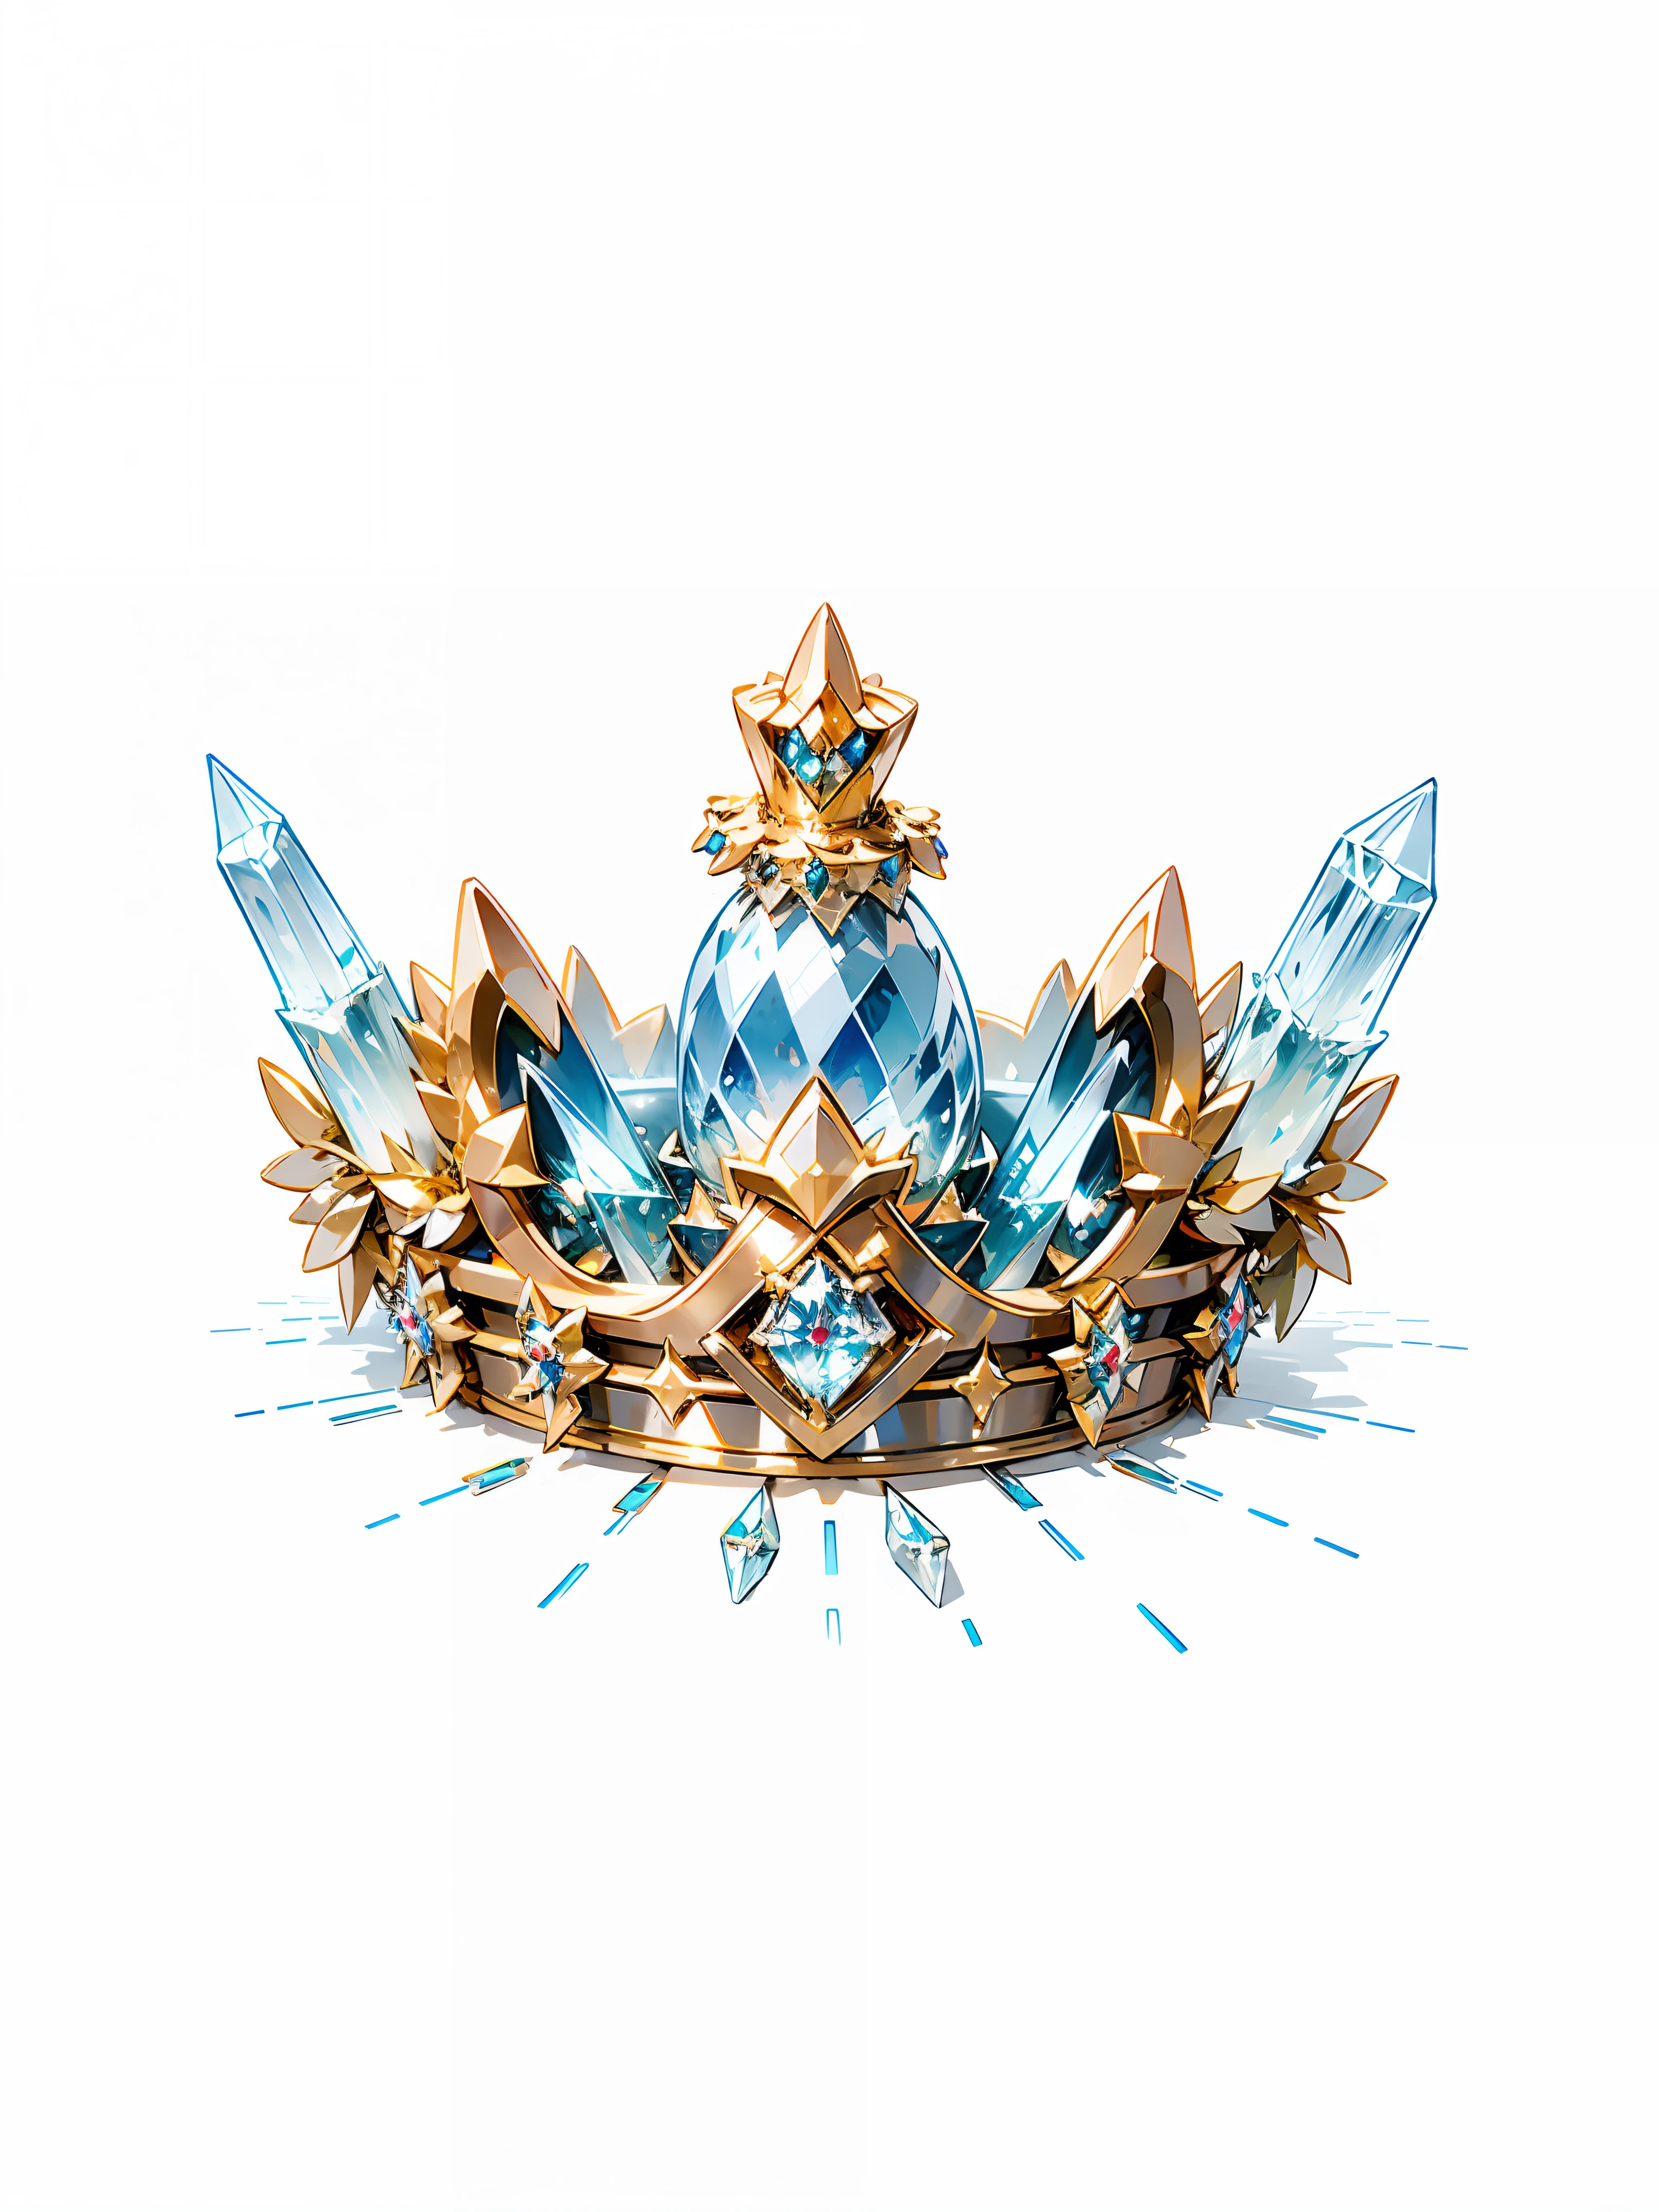 8k, (crown close-up), (((looking up))), with a gold + diamond crown on white background, diamond wings!! ,(((((Elf Crown)))),(Game Crown)))),((Gold + Diamond Crown)),((Left and Right Symmetrical Crown)),(((Streamlined Crown)))),(((Slim Crown))), Gorgeous, Colorful, Complex Diamonds, Ultra Realistic Fantasy Crown, Crystal Crown, White Laser Crown, Crystal Corolla, Floating Crown, (Ray Tracing), ((Clean Background)), Crown, Flower Corolla, Crown, Giant Diamond Crown, Diamond Tiara, Diamond Crown --auto --s2